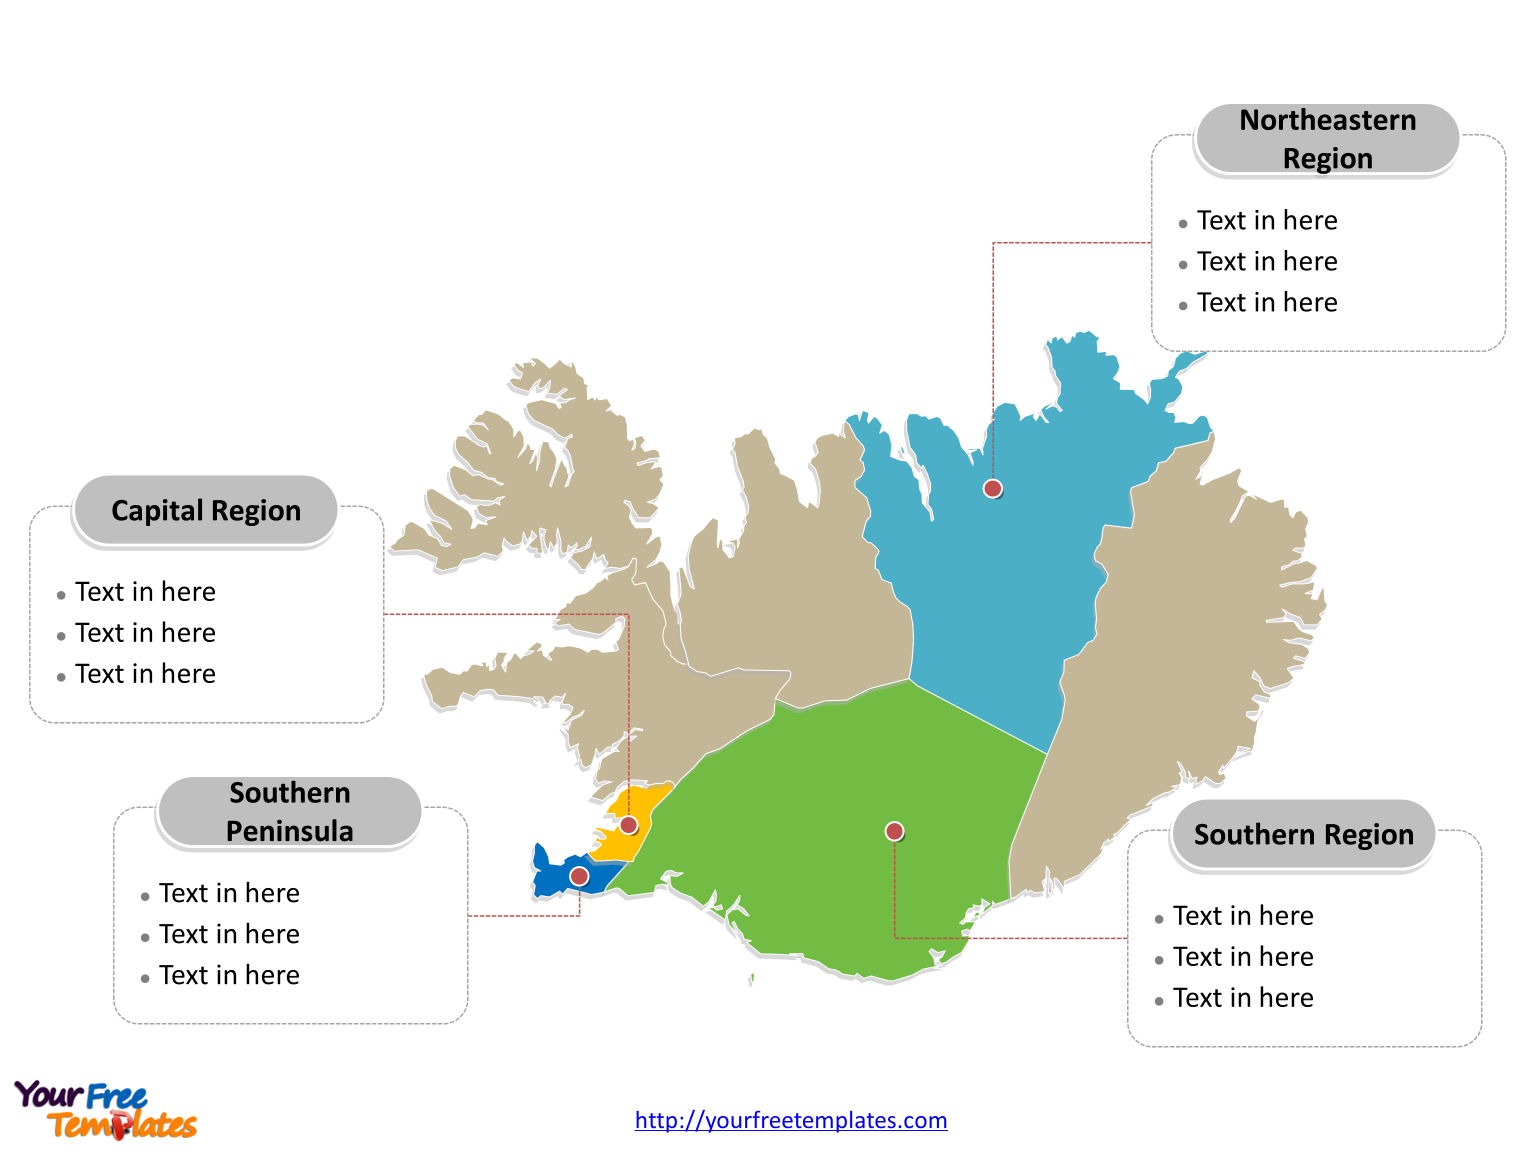 Iceland map labeled with cities